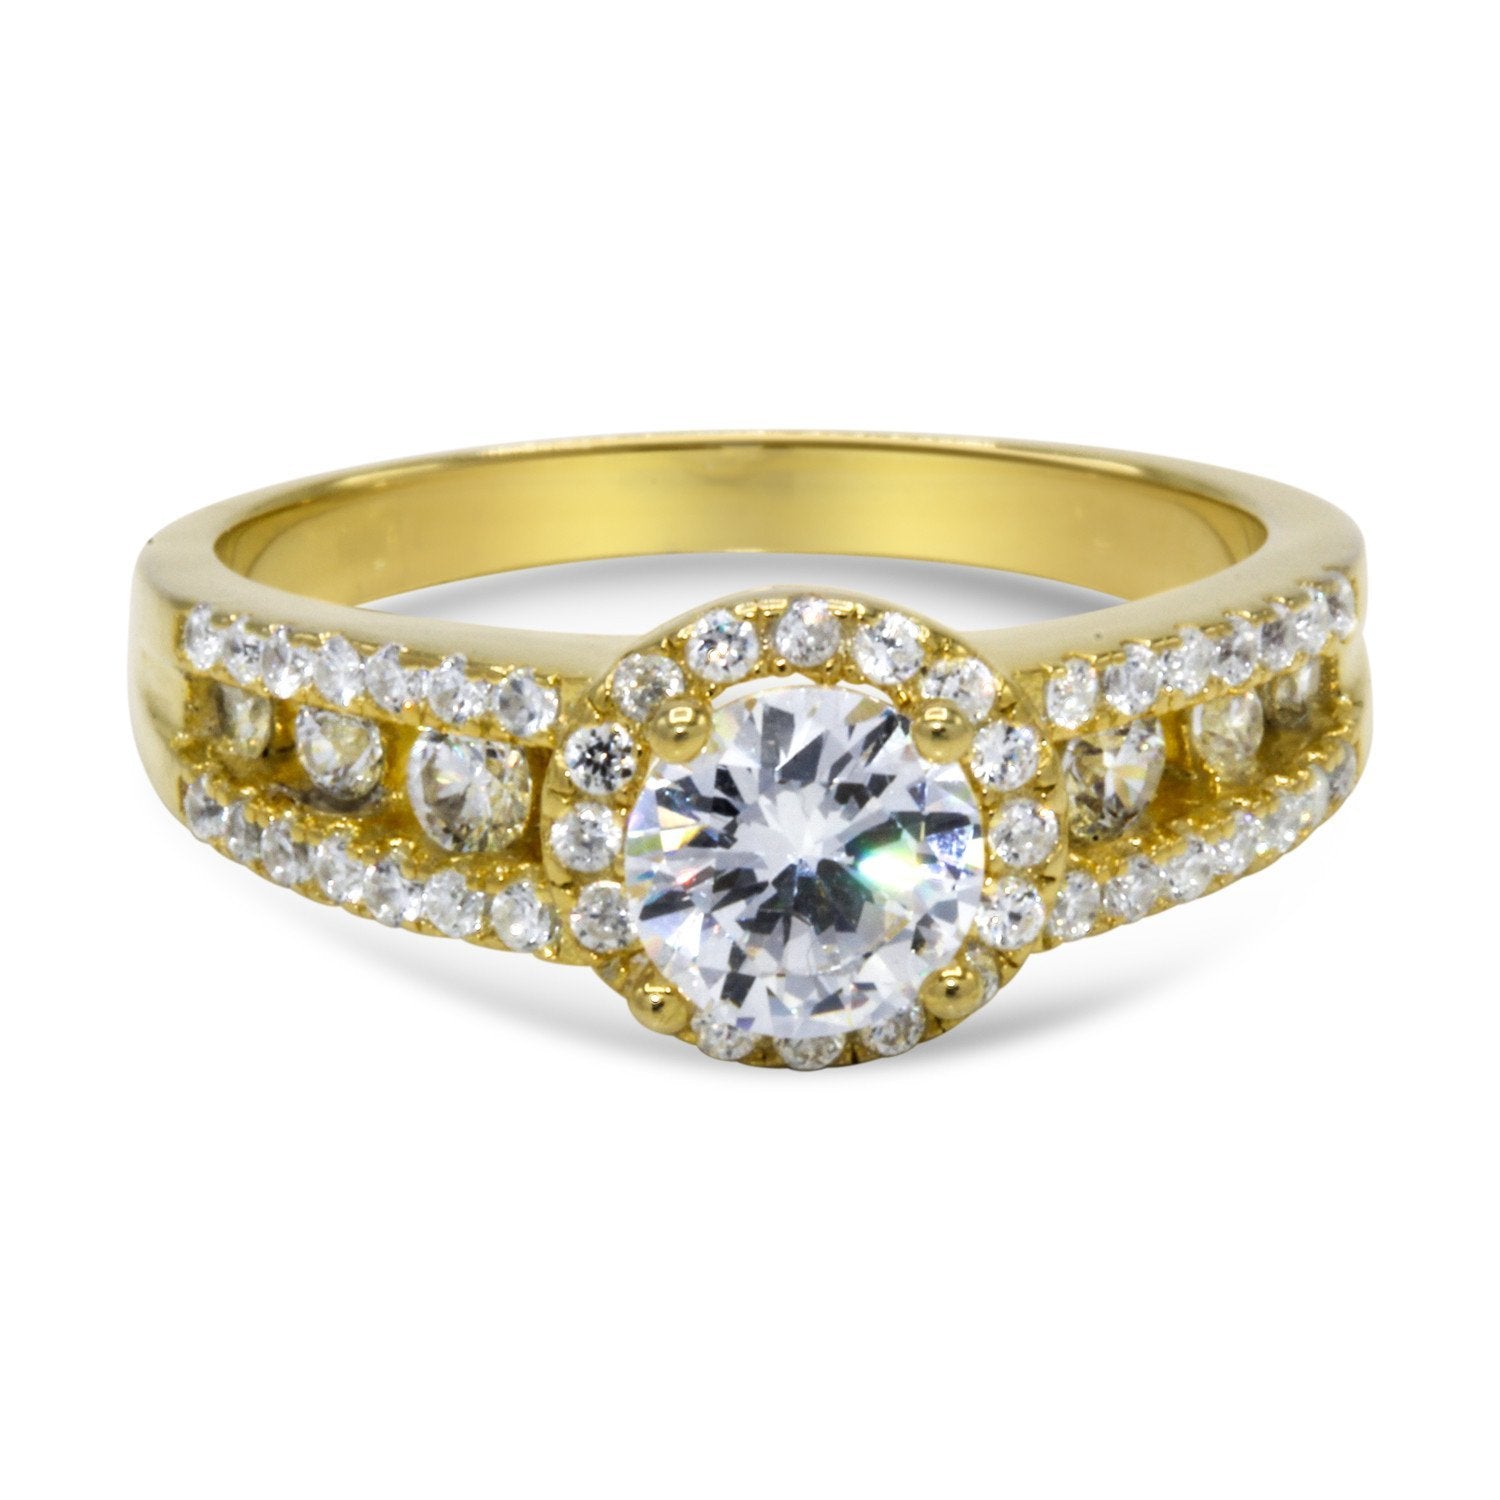 CZ 5mm Center Stone Gold Engagement Ring